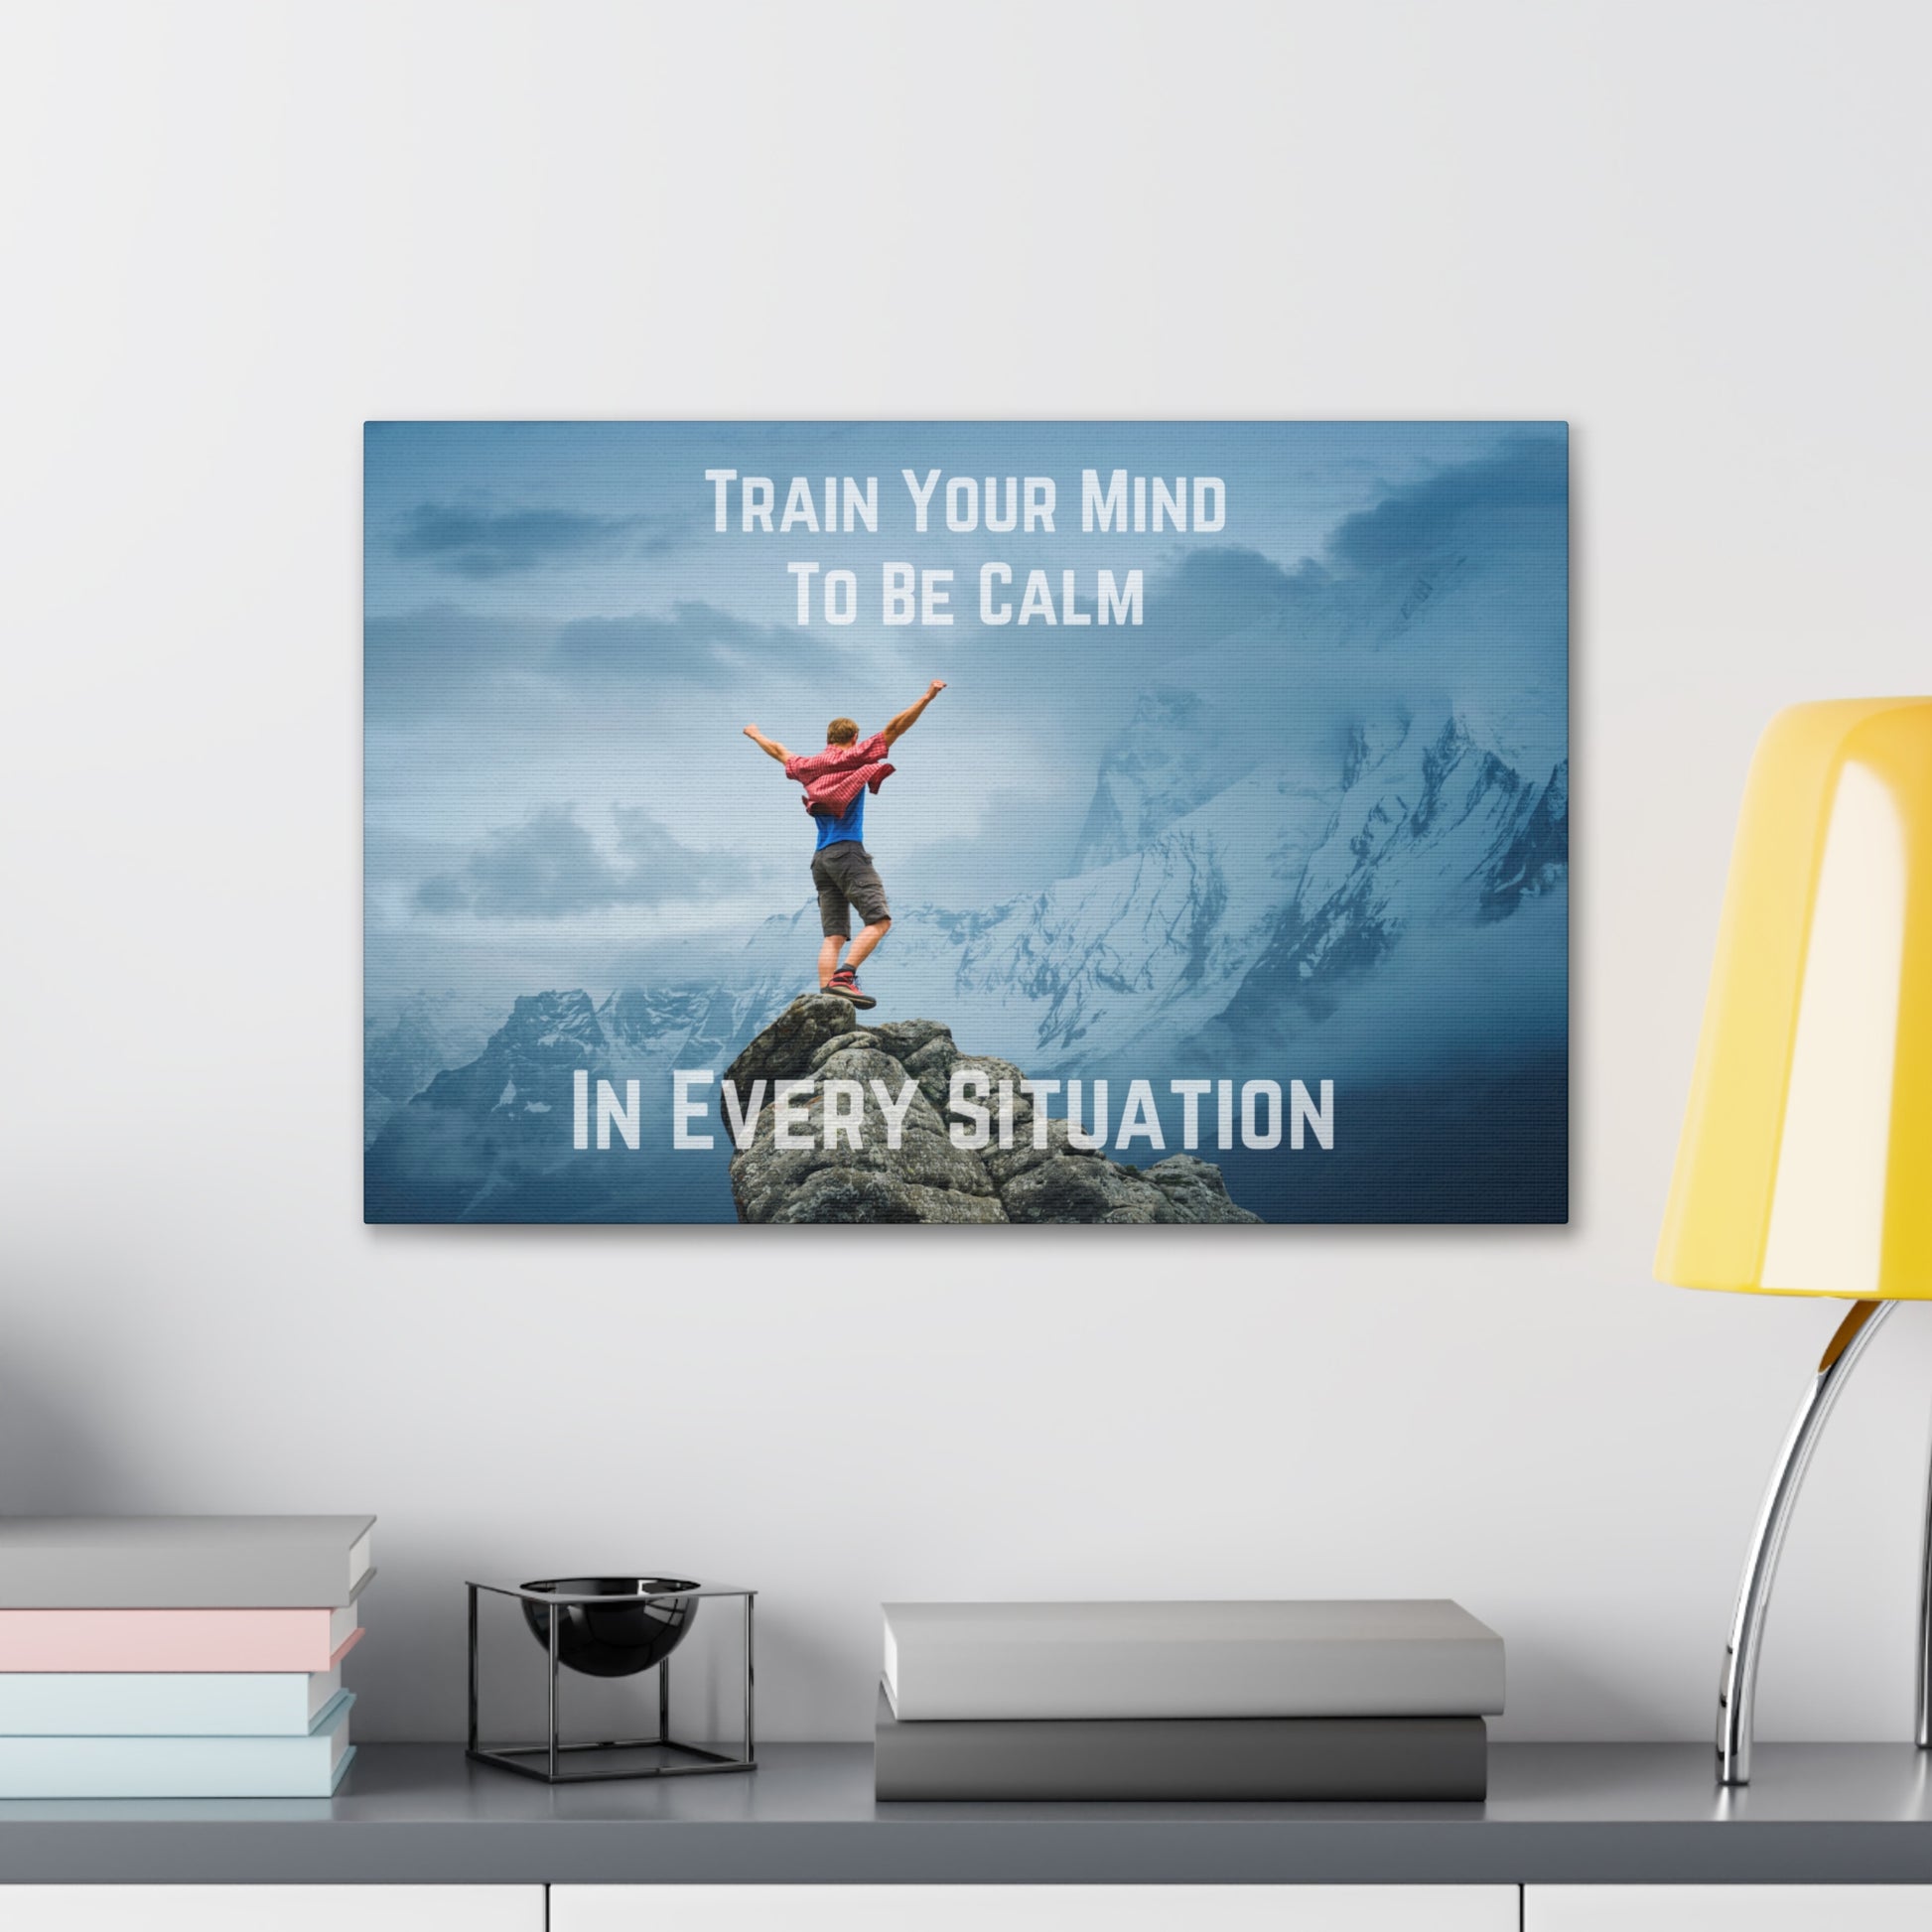 "Train Your Mind To Be Calm" Wall Art - Weave Got Gifts - Unique Gifts You Won’t Find Anywhere Else!